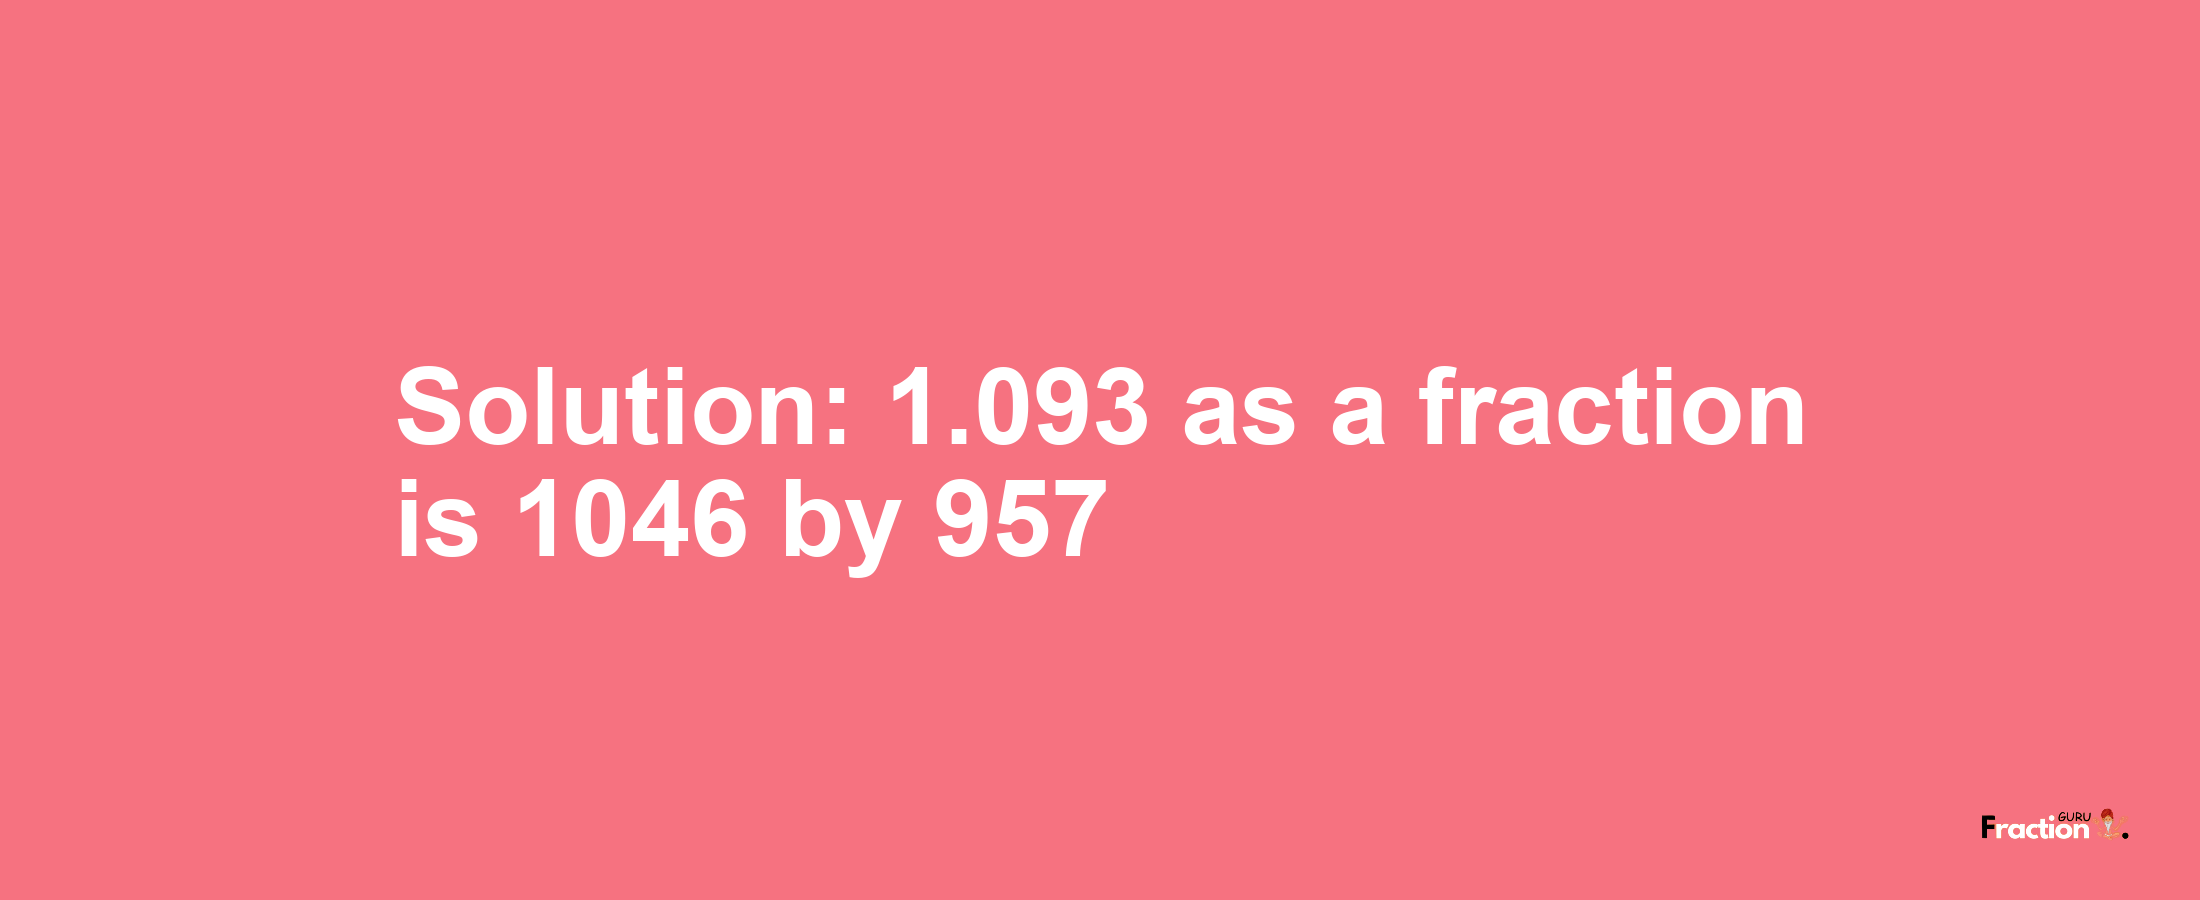 Solution:1.093 as a fraction is 1046/957